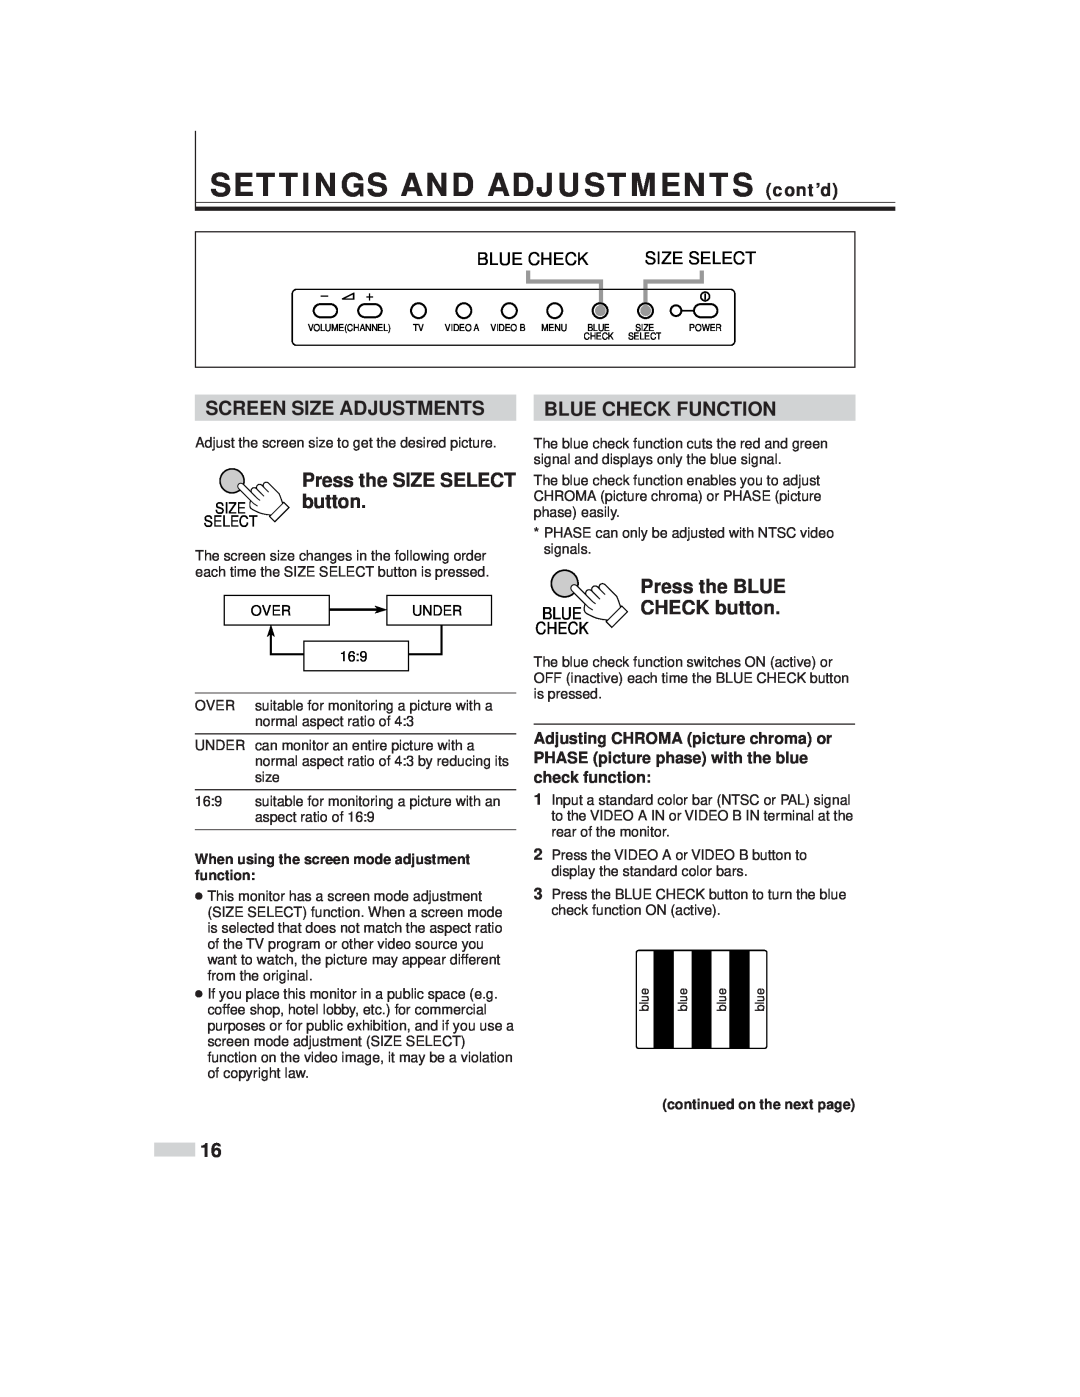 JVC TM-L450TU SETTINGS AND ADJUSTMENTS cont’d, Screen Size Adjustments, Press the SIZE SELECT SIZE button, Blue Check 